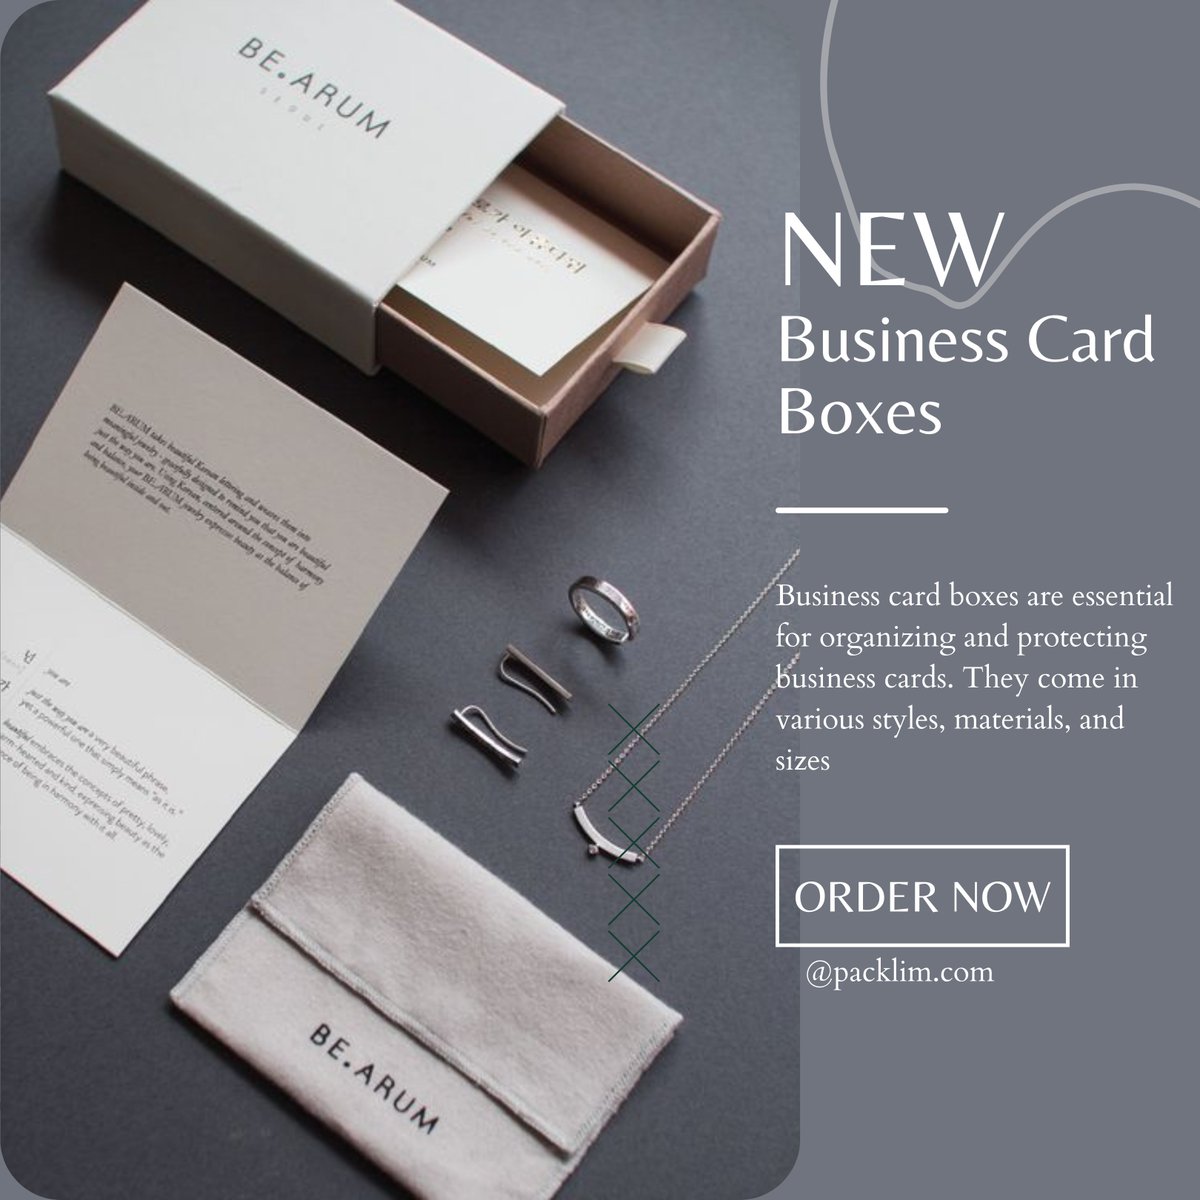 Business Card Boxes
'Keep your business cards organized and stylish with our sleek Business Card Boxes! Perfect for professionals on the go. Get yours now! #BusinessEssentials #ProfessionalGear #OrganizationGoals'
packlim.com/custom-busines…